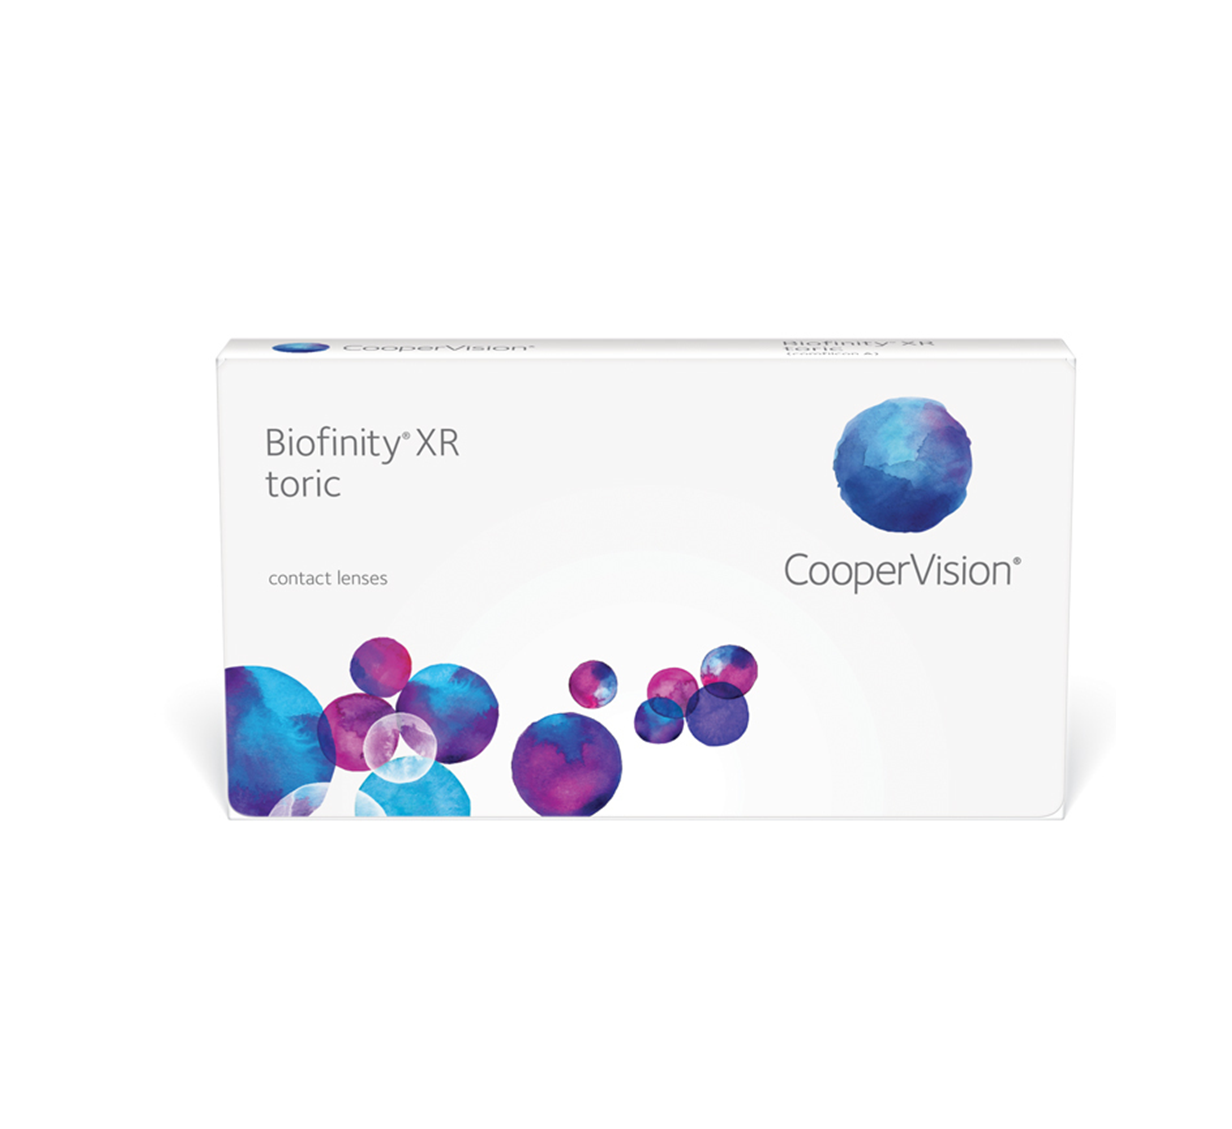 Biofinity XR toric Monthly Disposable Silicone Hydrogel contact lens for Astigmatism (3 lenses box)